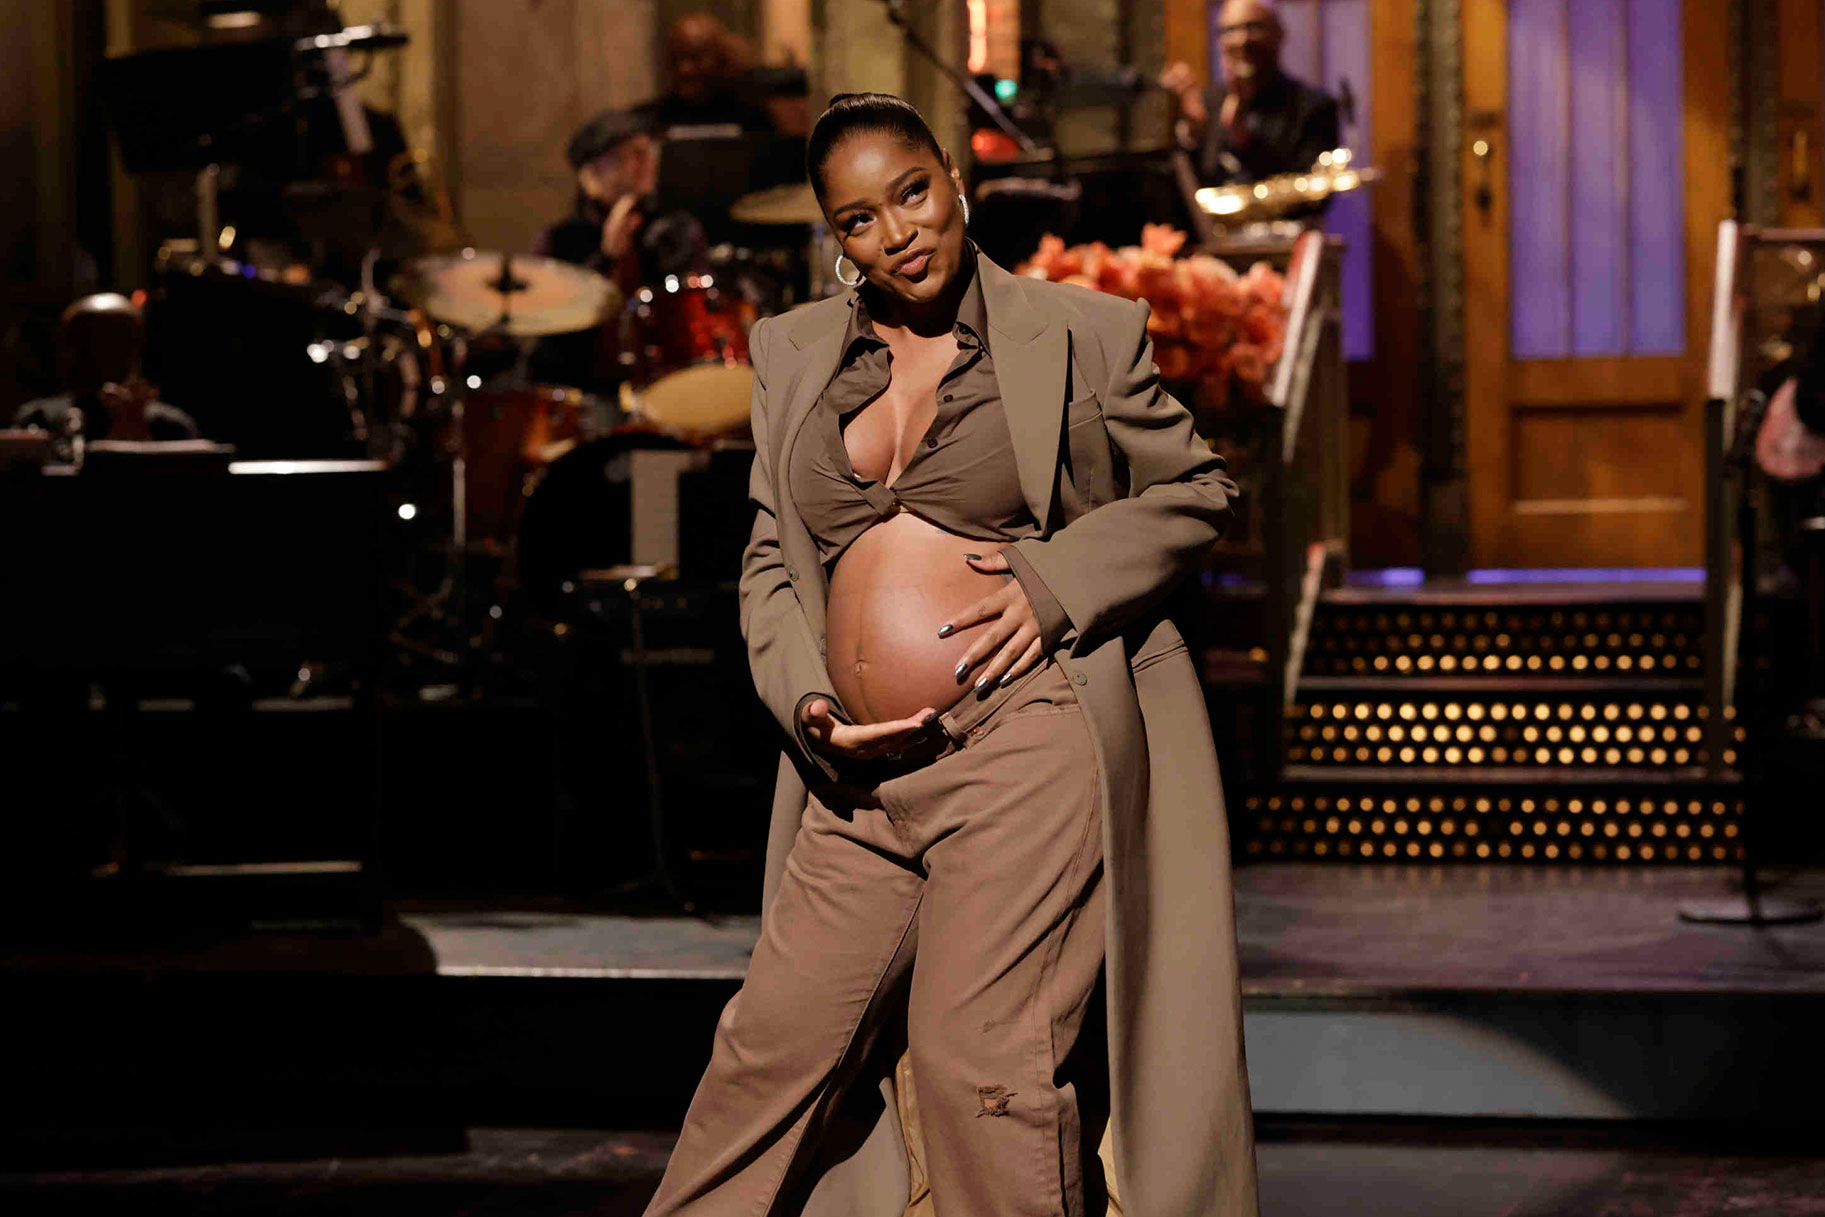 Keke Palmer Announced on SNL That She's Expecting Her First Child